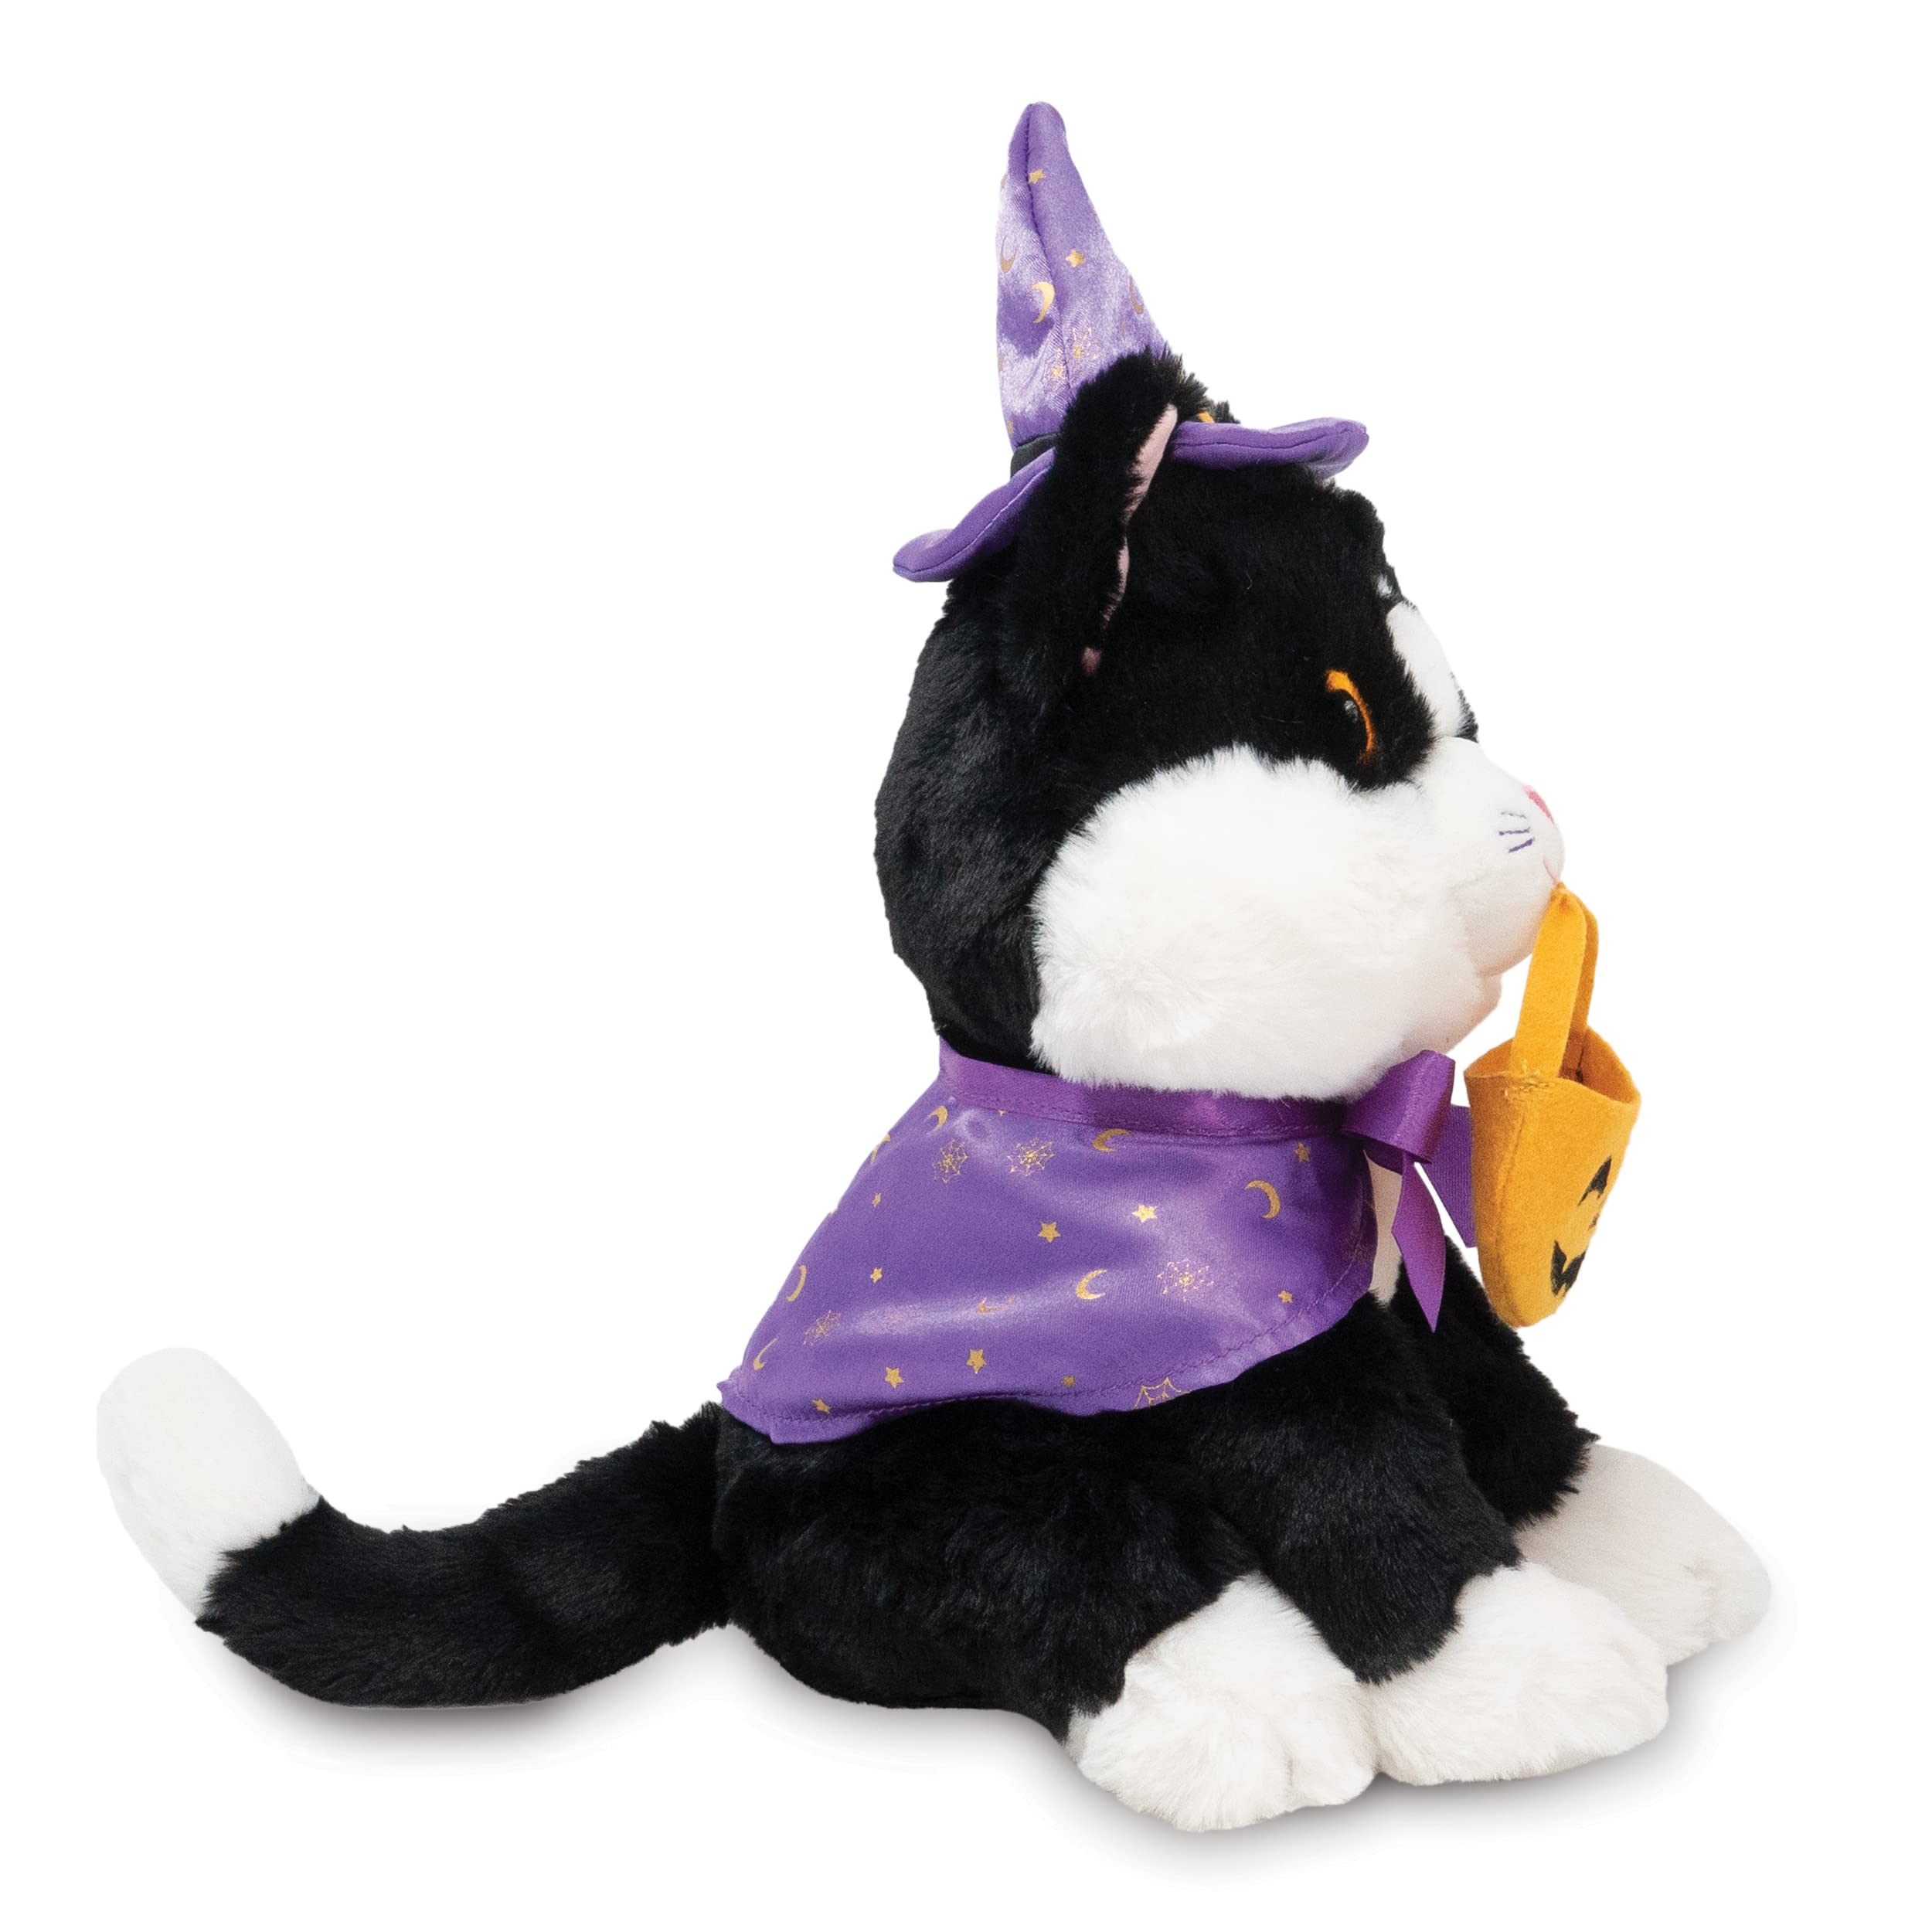 Cuddle Barn - Trick-or-Treat Tammy | Animated Halloween Tuxedo Cat Stuffed Animal Plush Toy, Dressed as Wizard Twirls to I Want Candy, 9 inches